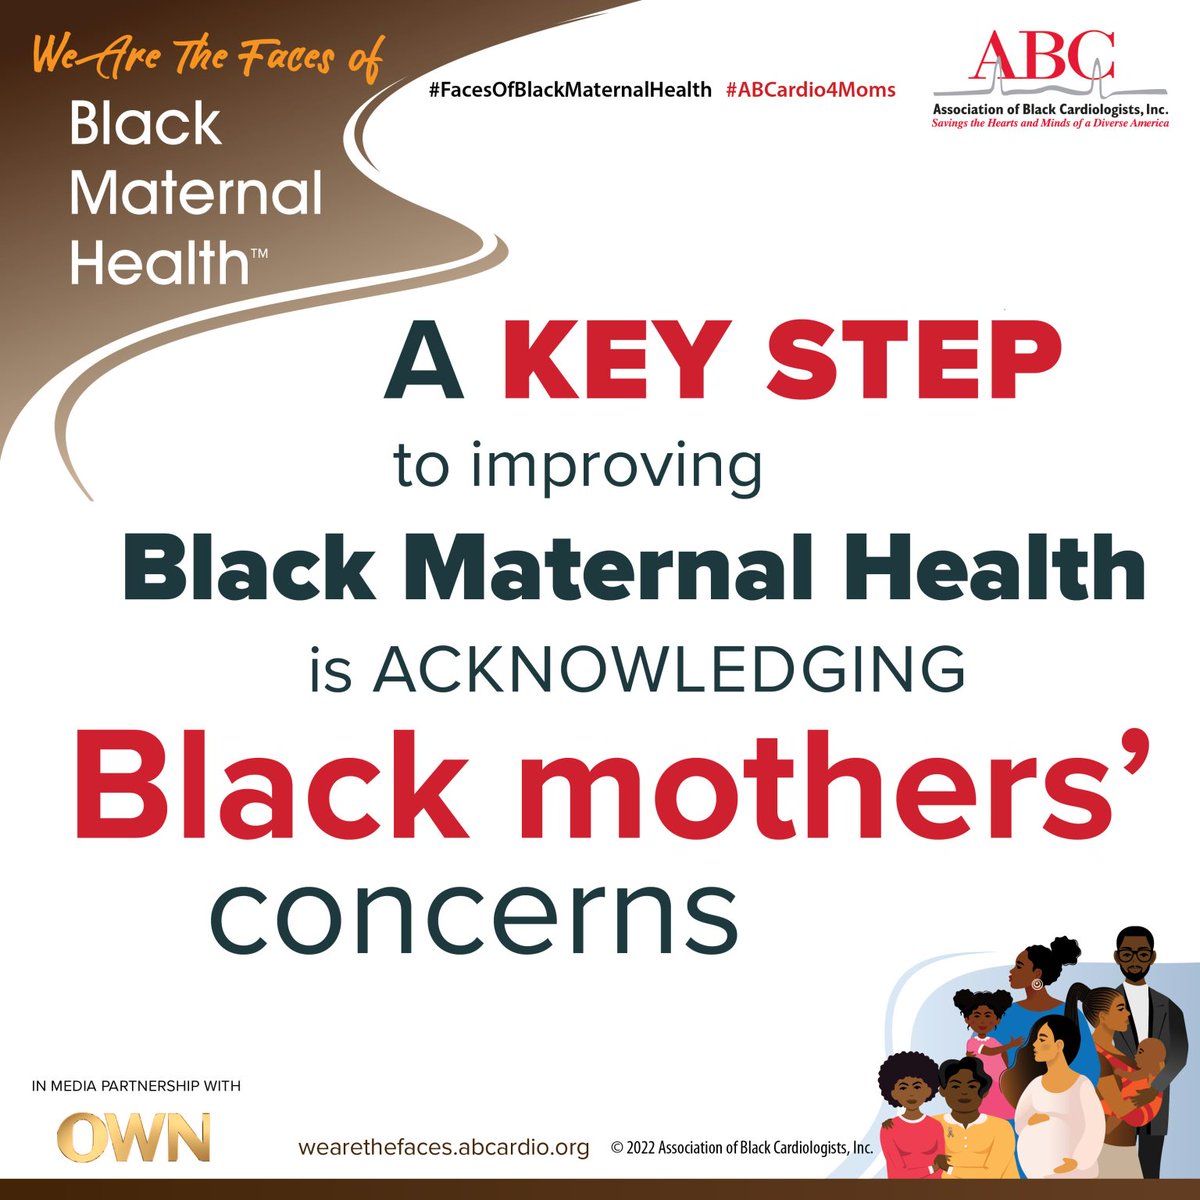 Listen to some of my friends & colleagues who are the #FacesOfBlackMaternalHealth. #BelieveWomen, #Care4Moms.  Save lives. We can #DoBetter 
#ABCardio4Moms
wearethefaces.abcardio.org